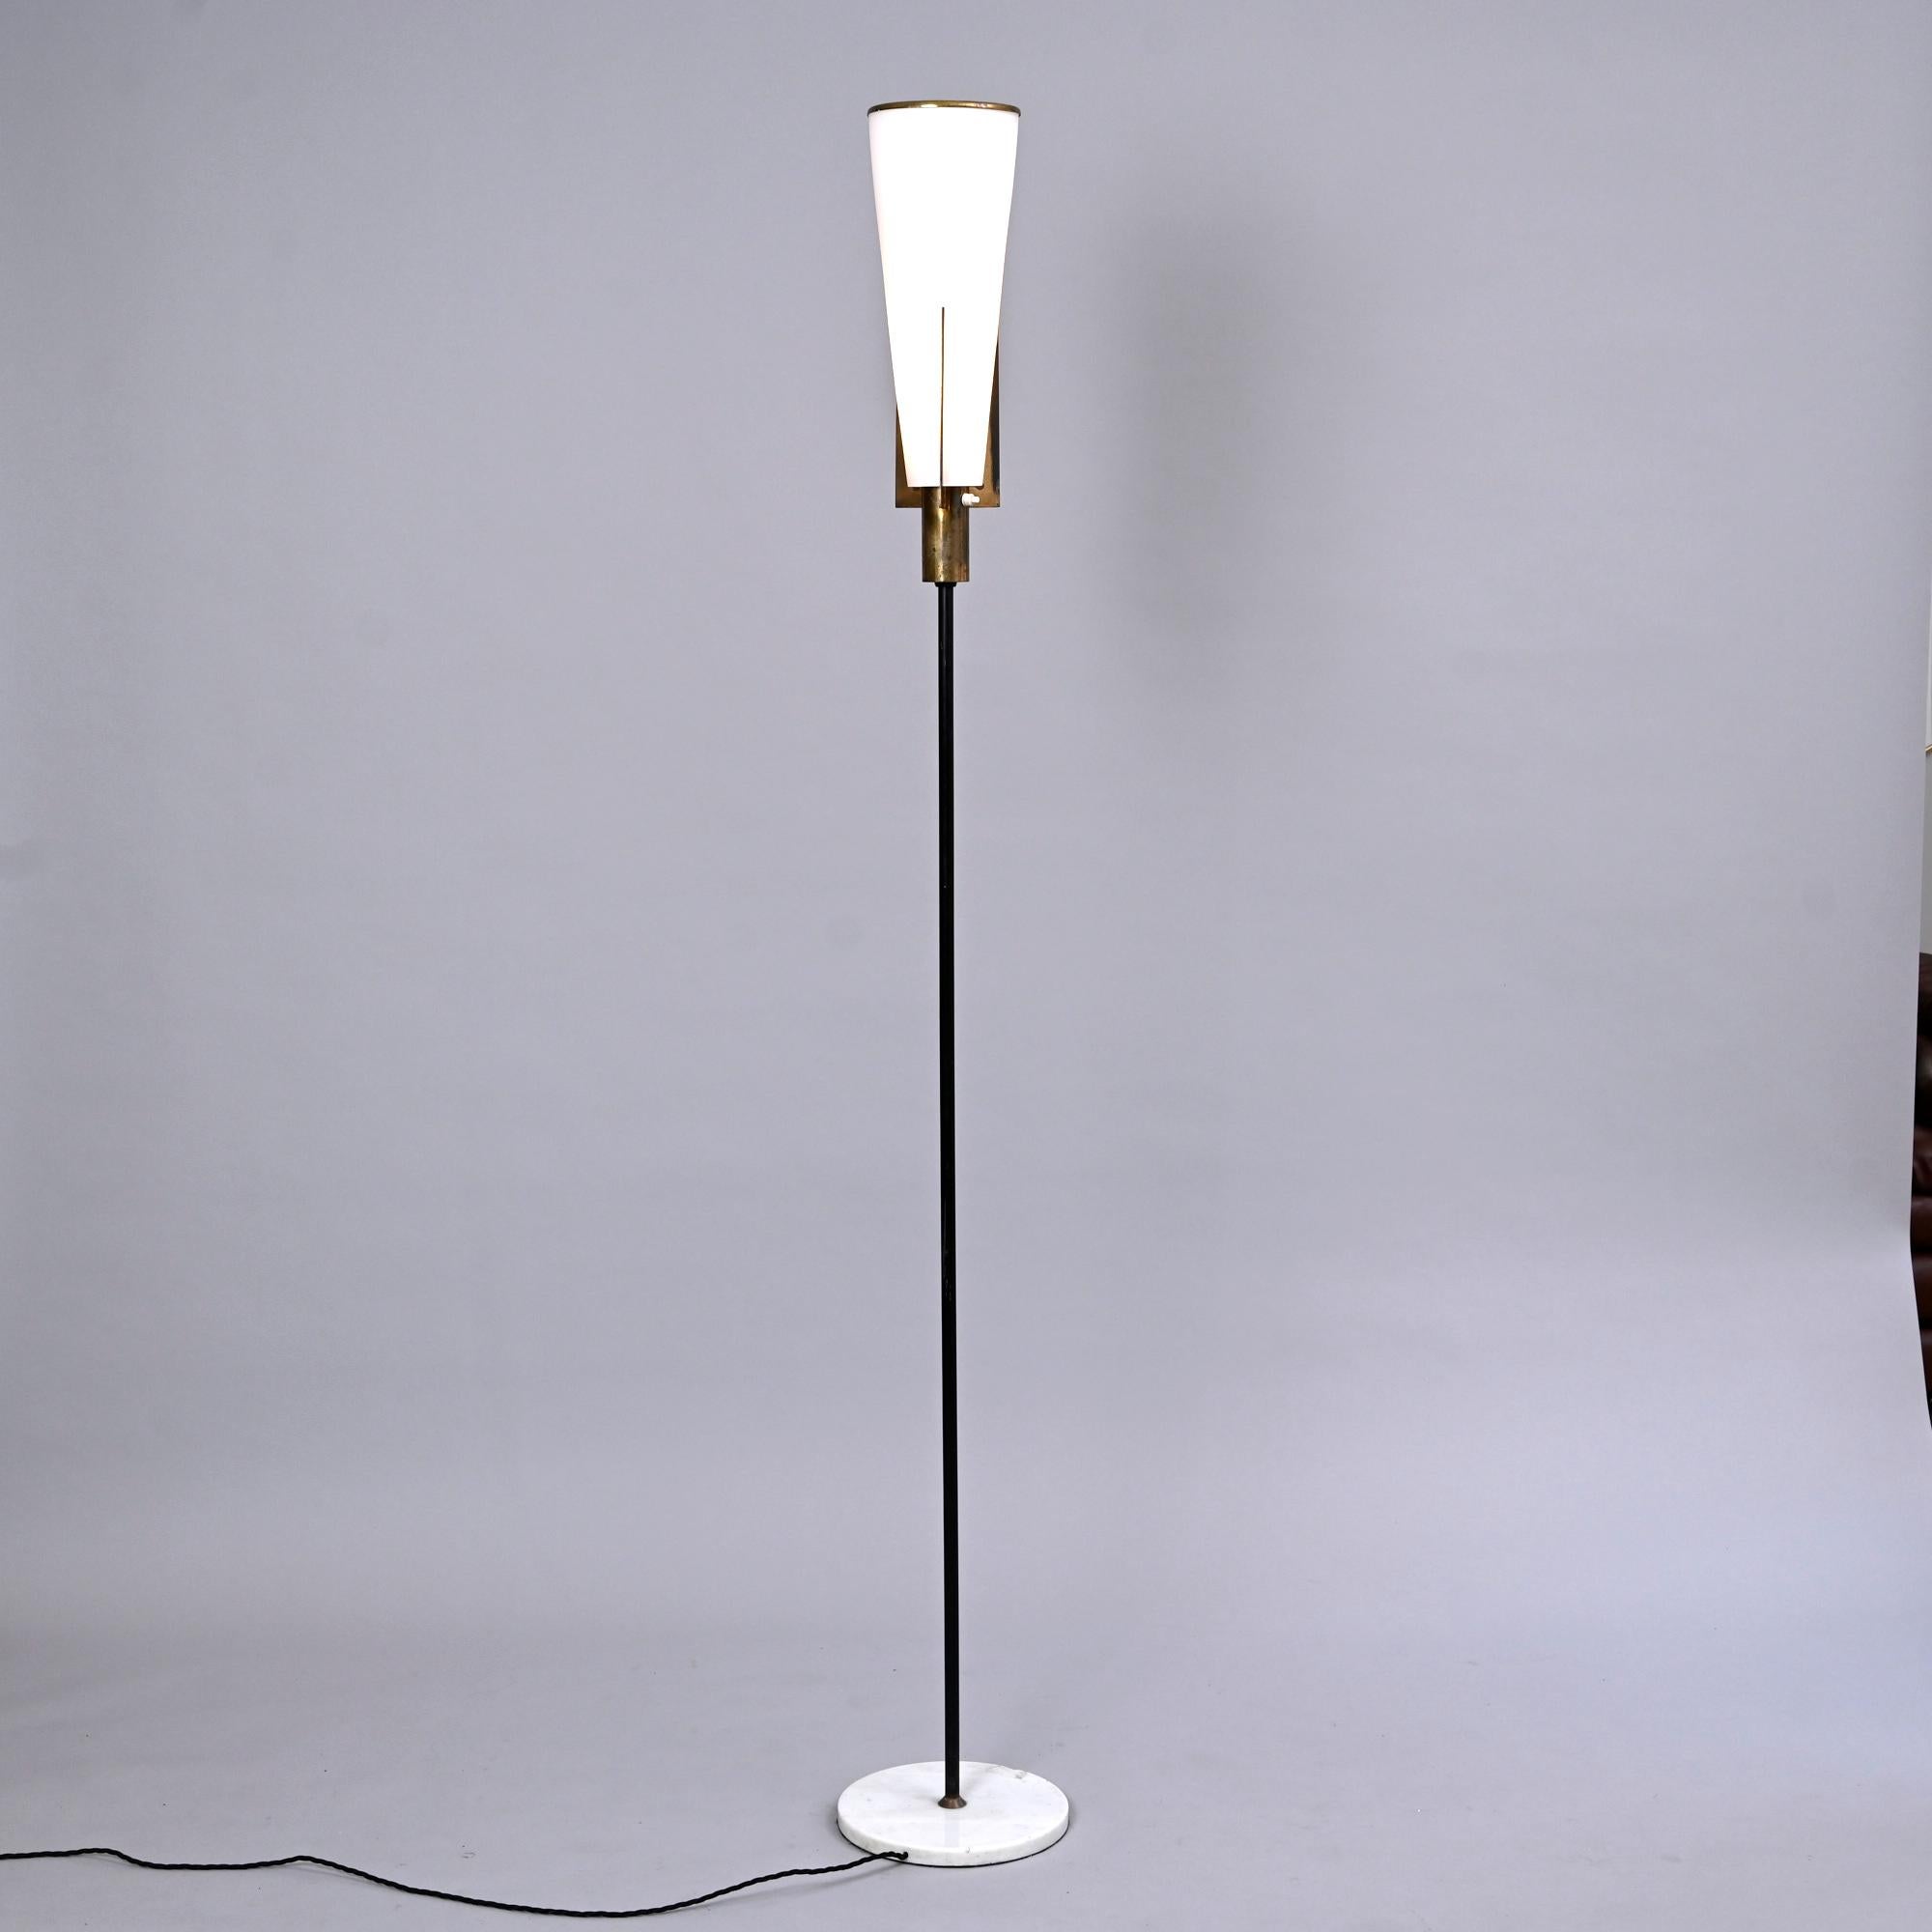 Very rare floor lamp version of the Stilnovo wall light. Model 2021/2

Original floor lamp. Brass has lovely patina. 

The lamp has been rewired and is structurally sound.